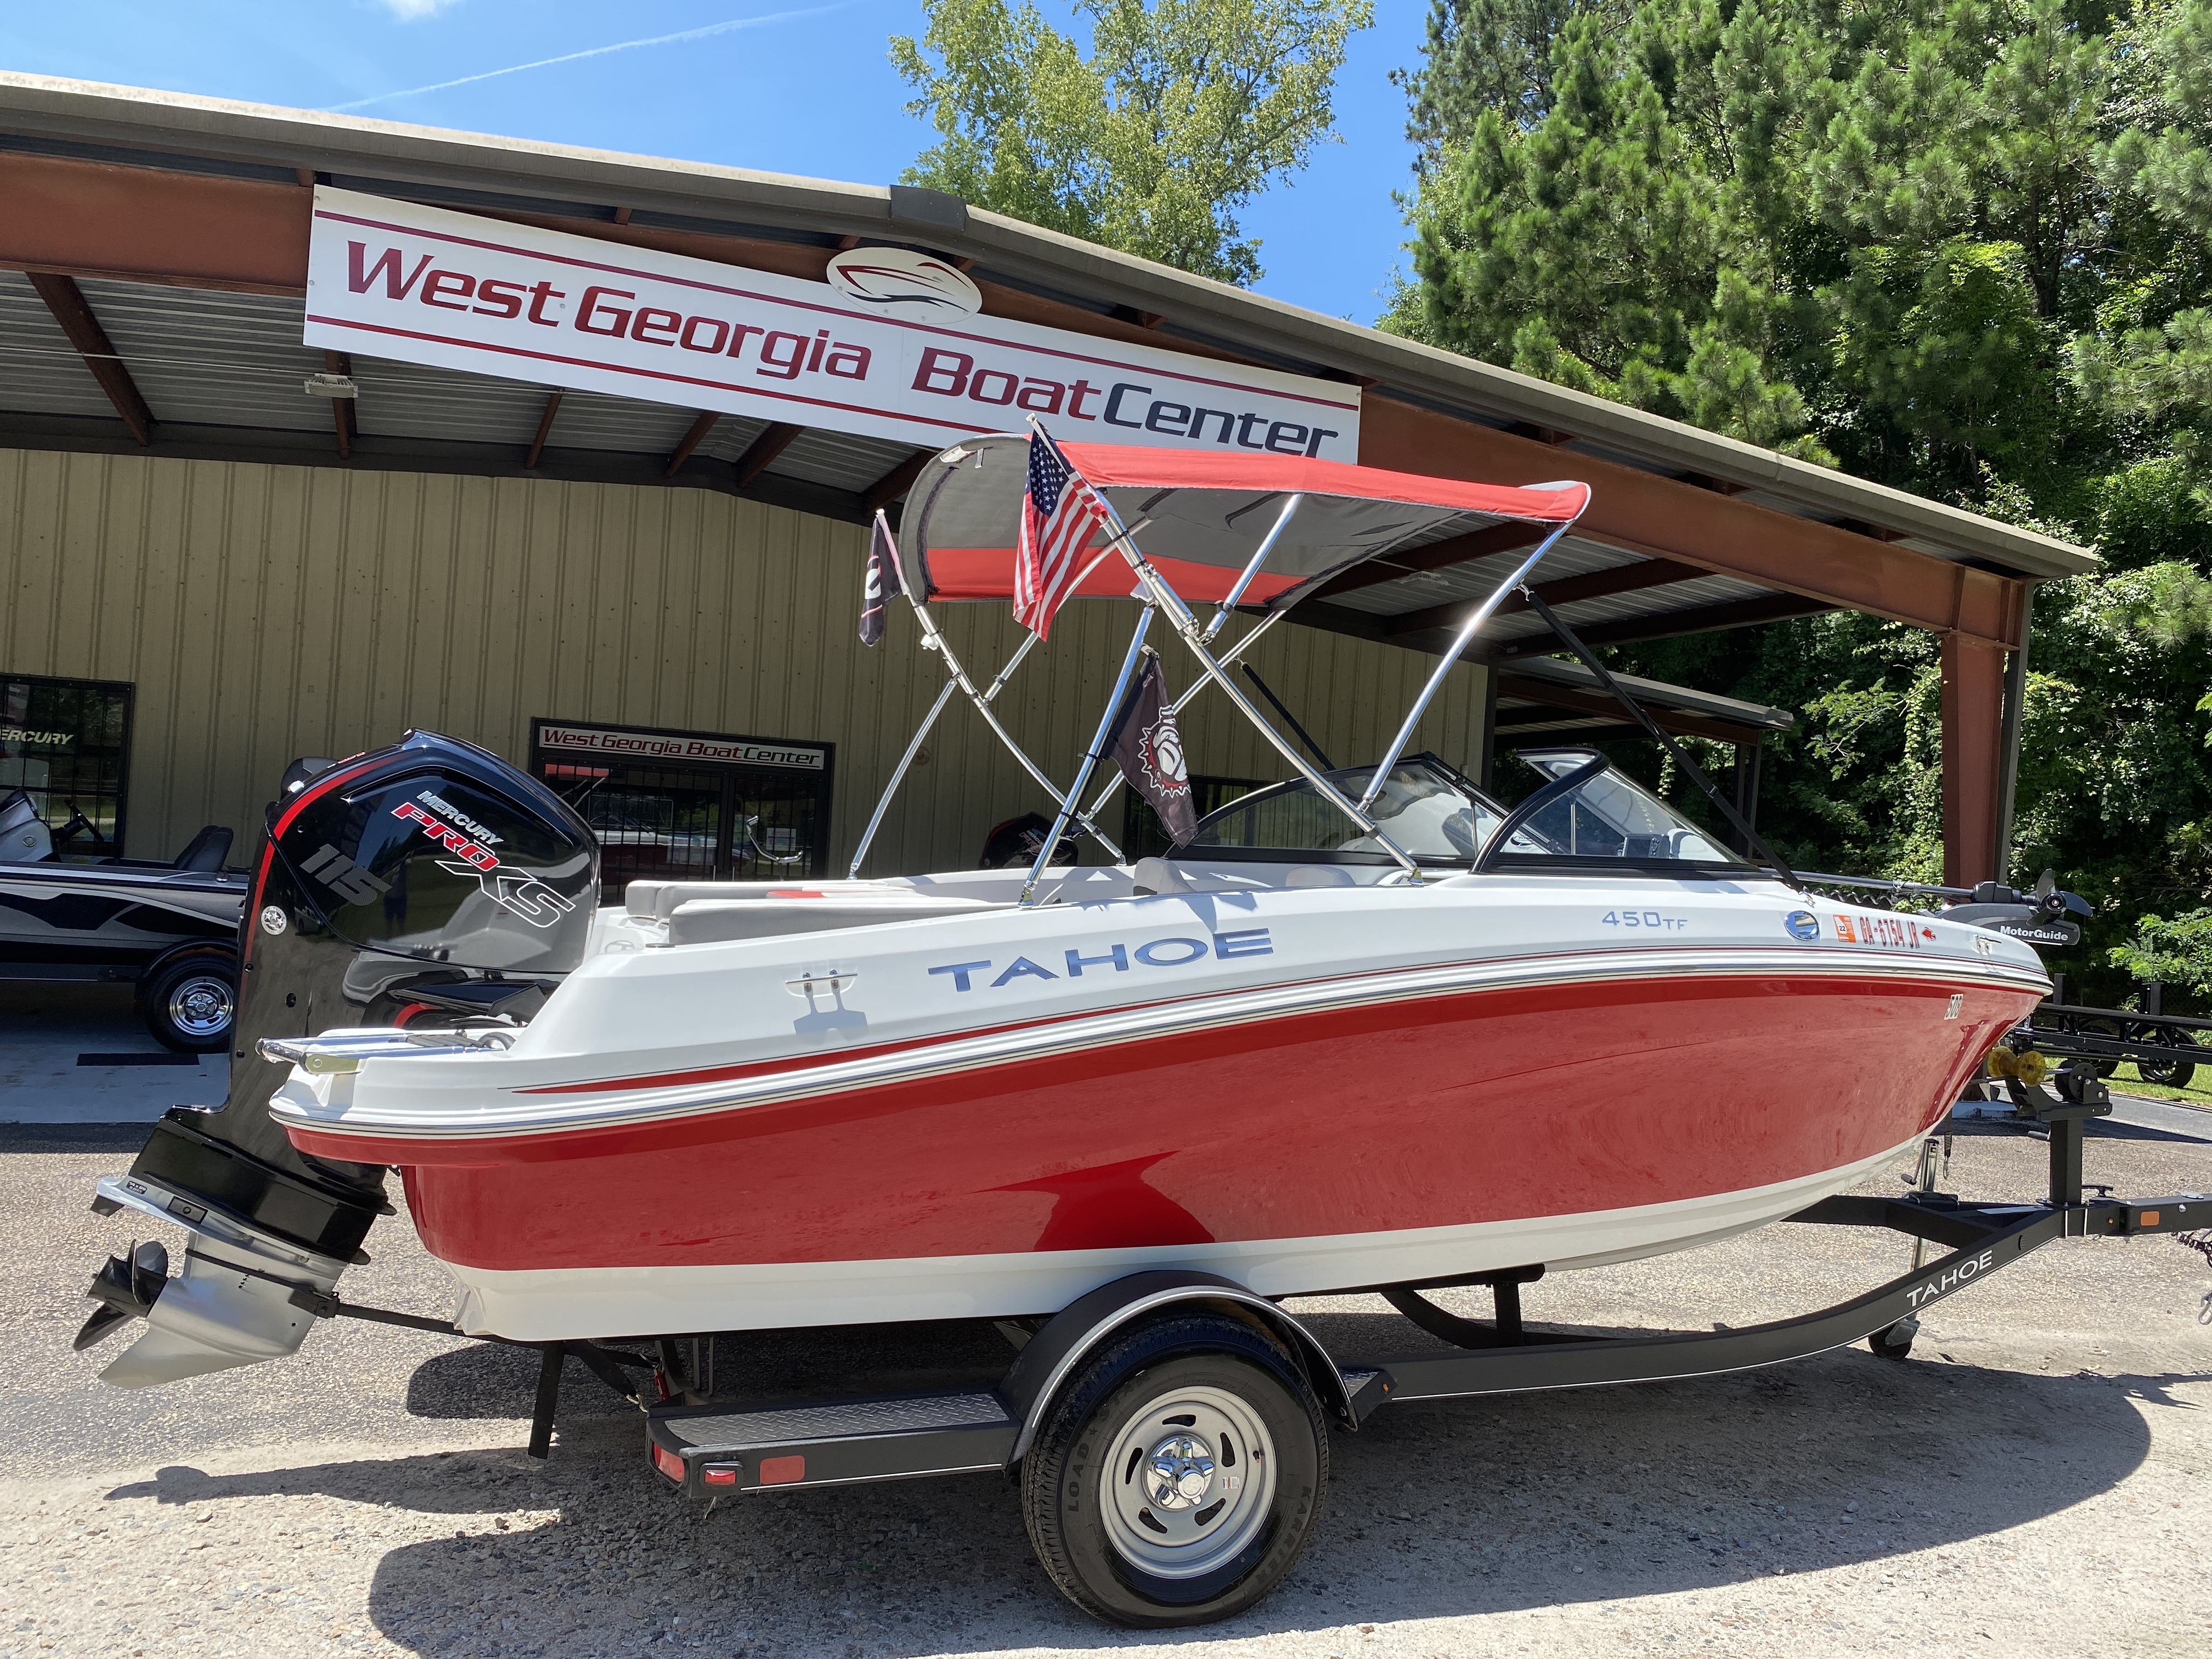 2019 Tahoe boat for sale, model of the boat is 450 TF & Image # 23 of 23